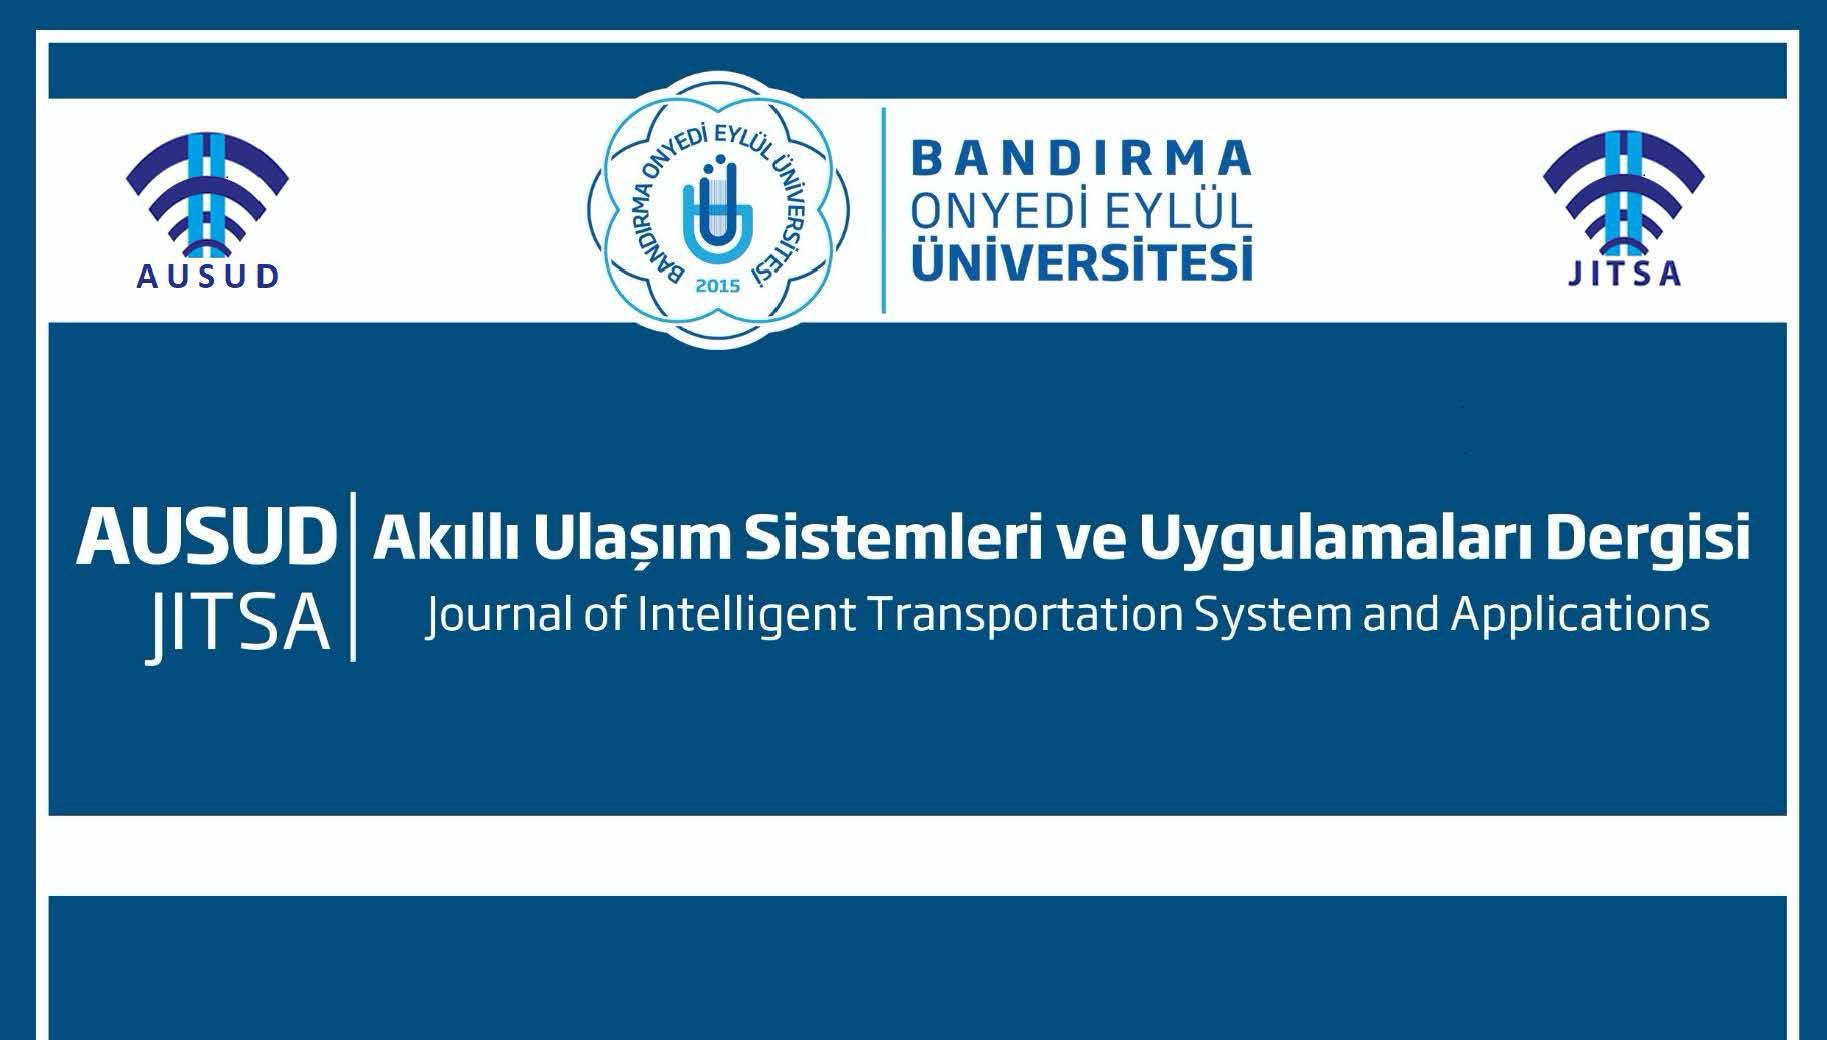 Journal of Intelligent Transportation Systems and Applications